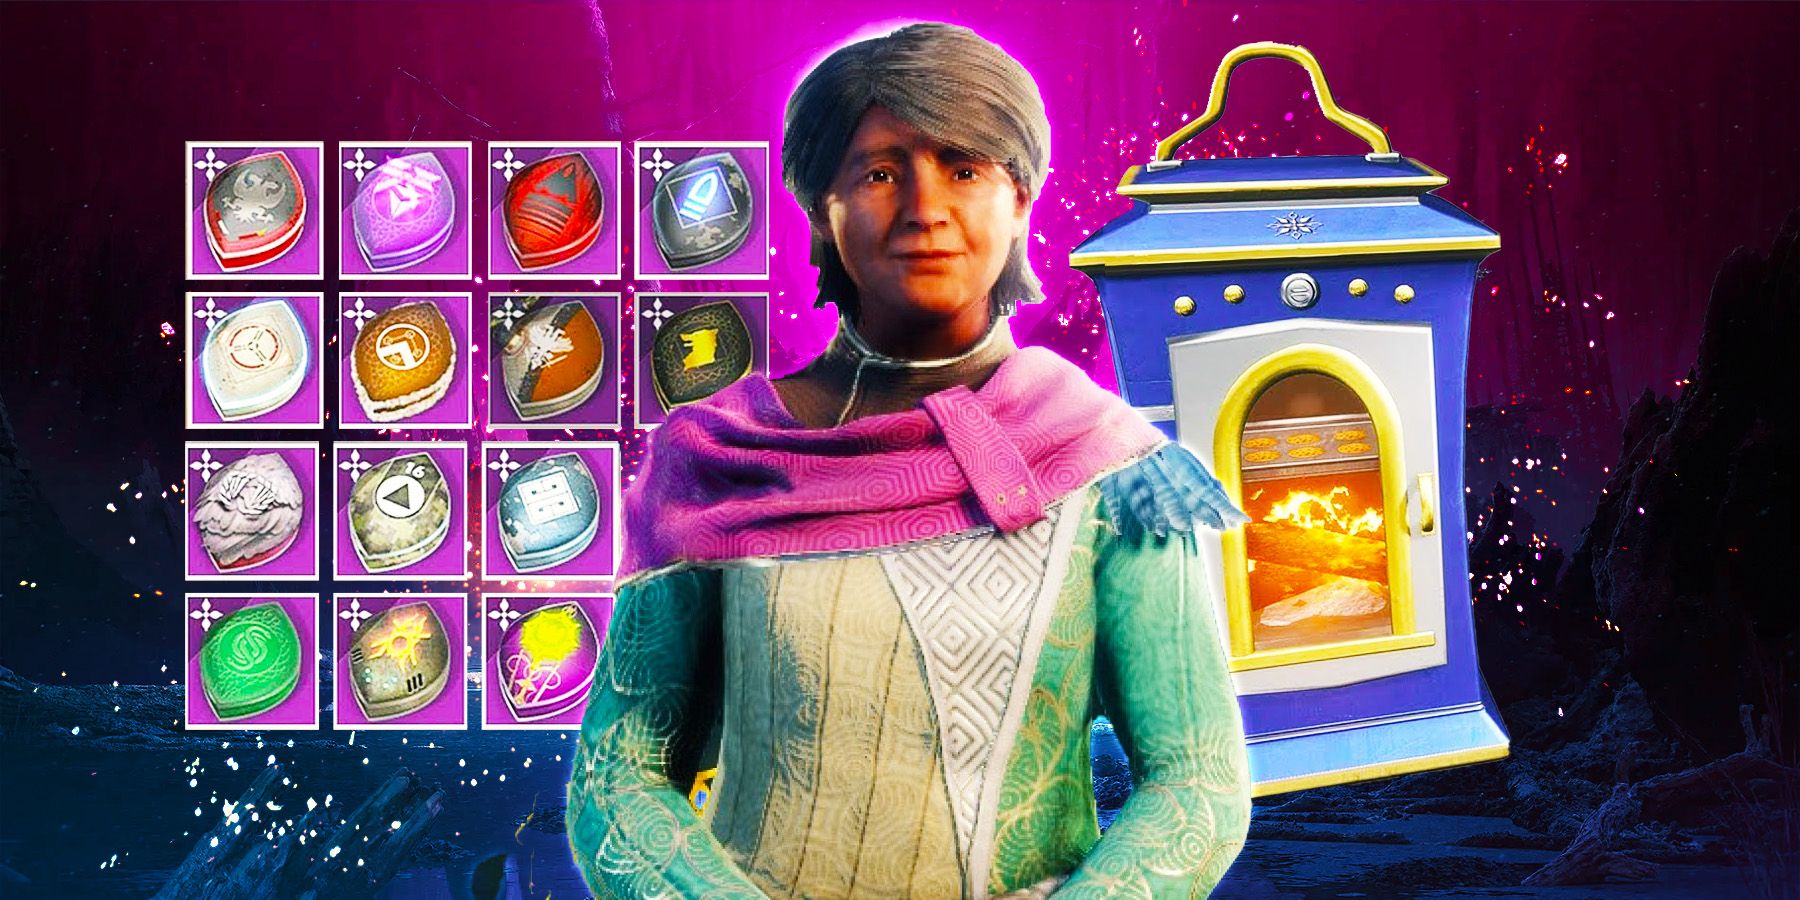 Eva Levante from Destiny 2 smiles, with recipes and the baking oven in the background.